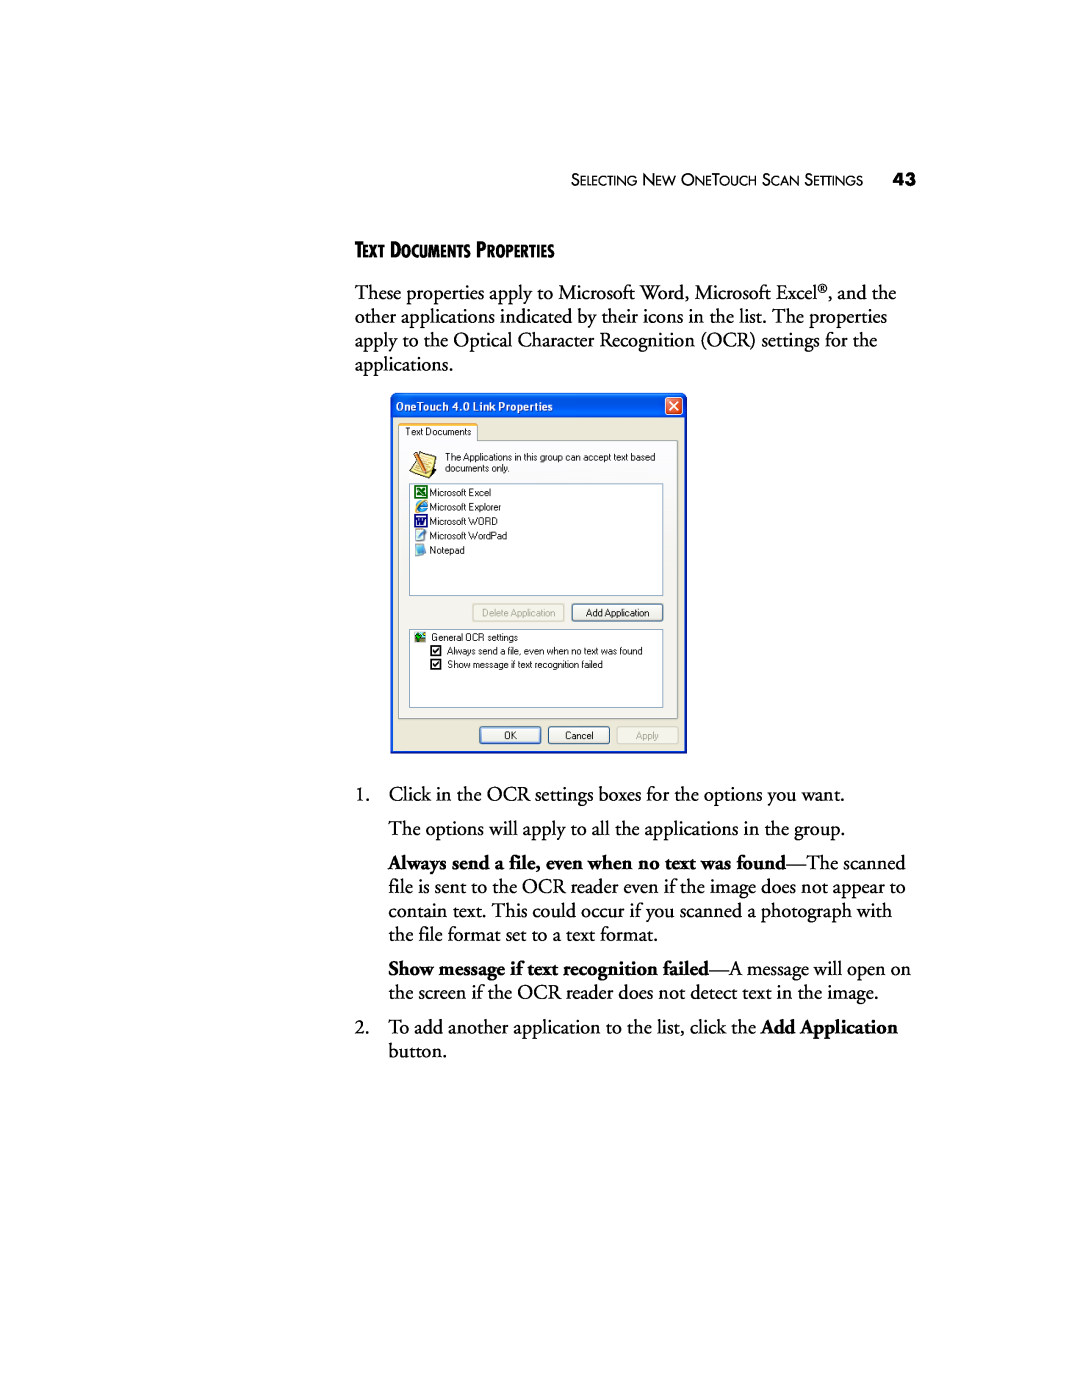 Visioneer XP220 manual Text Documents Properties 